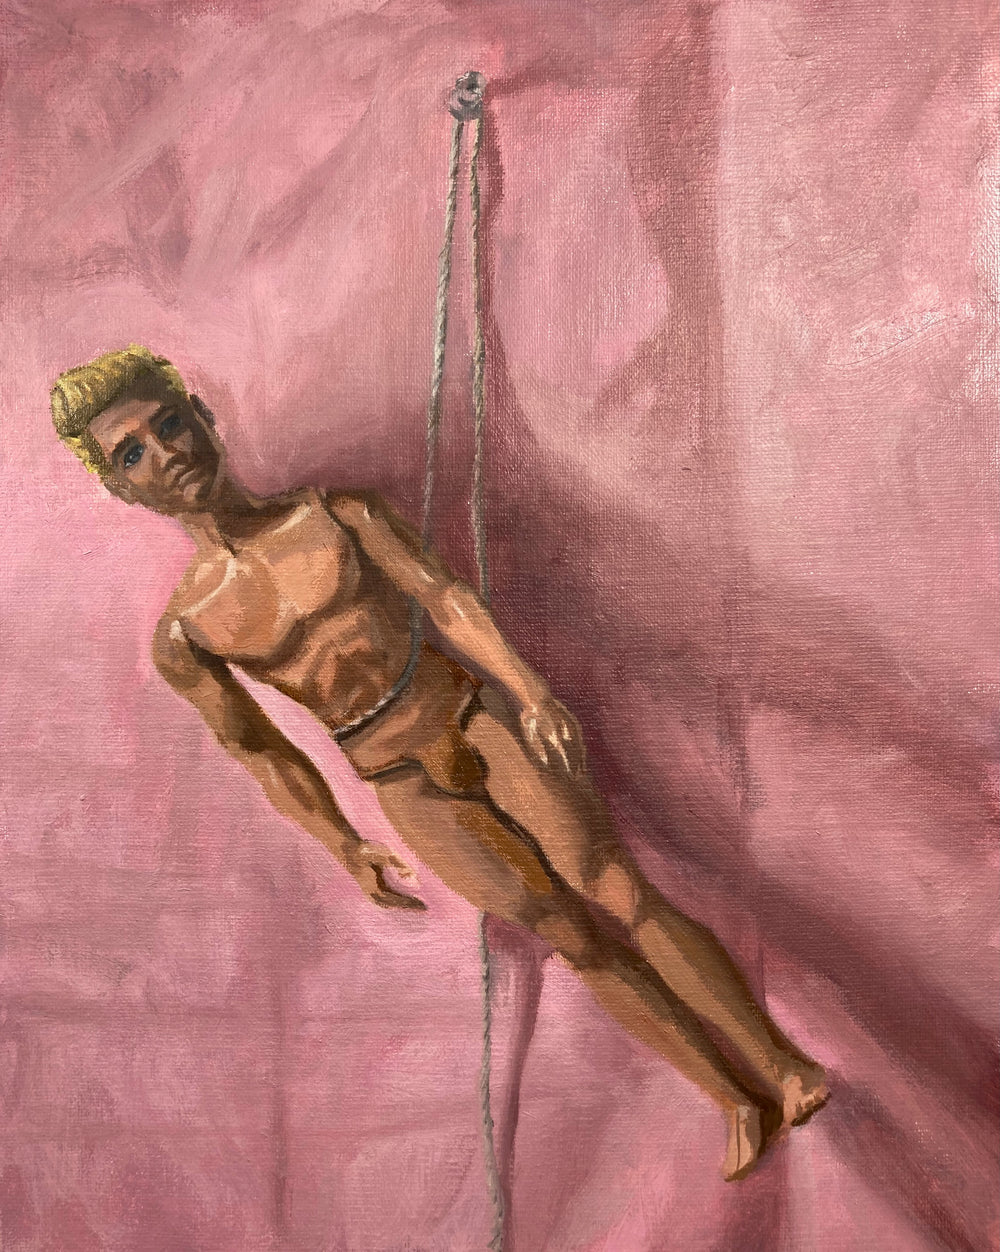 painting of a nude Ken doll hung on a wall by string